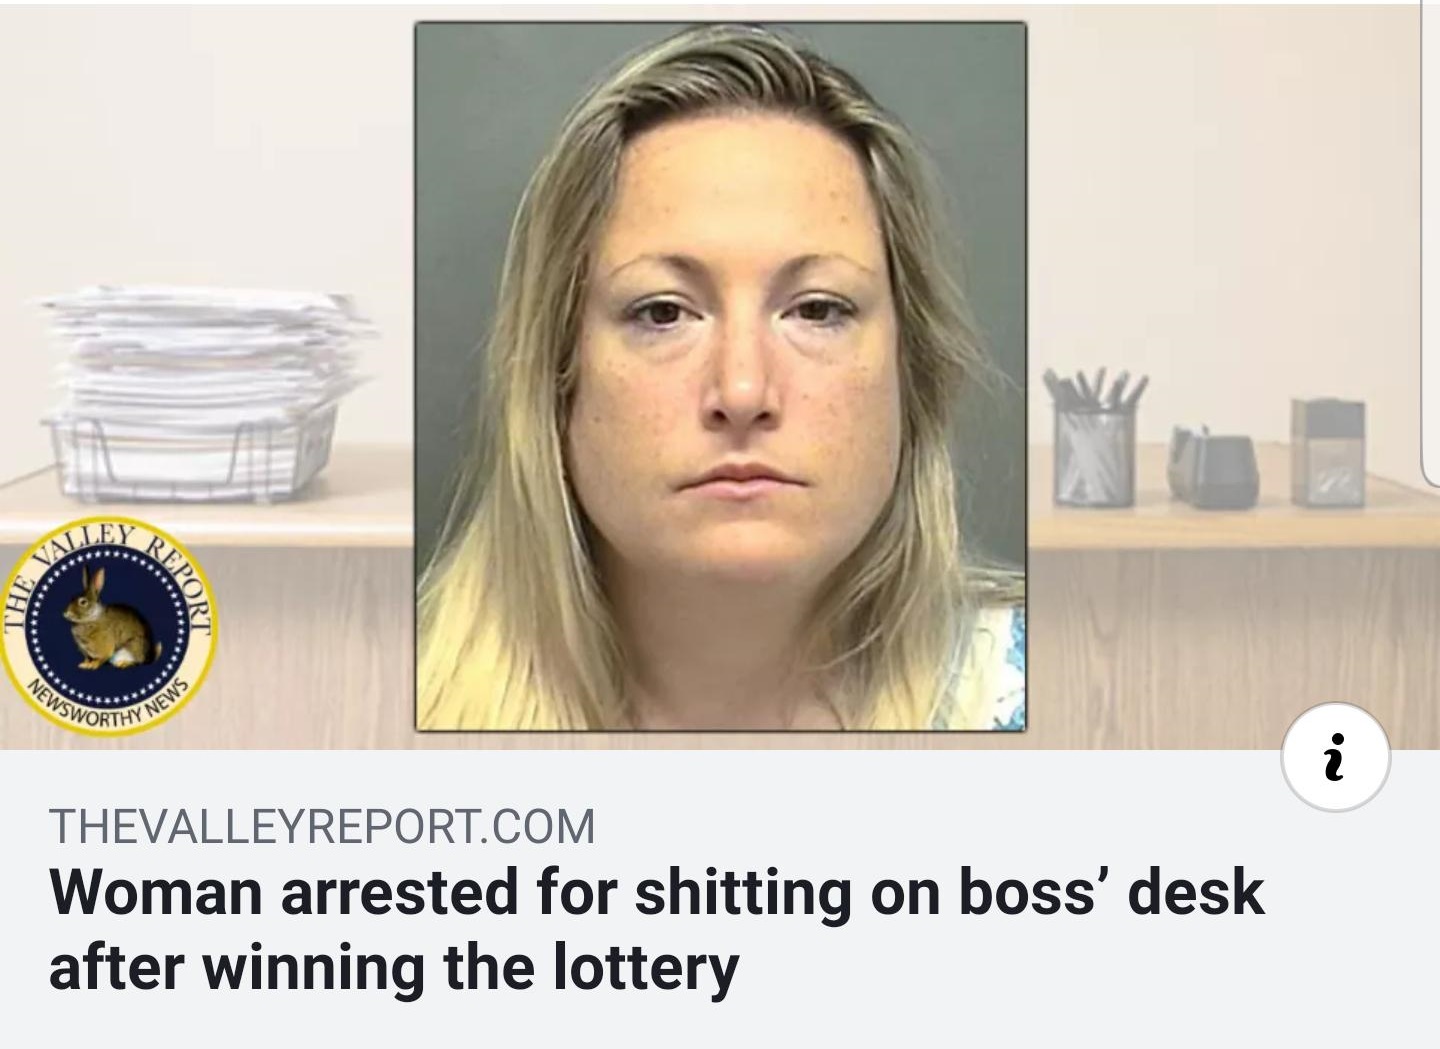 woman arrested for defecating on boss desk after winning the lottery - The Newsw Sworthy Y News Thevalleyreport.Com Woman arrested for shitting on boss' desk after winning the lottery